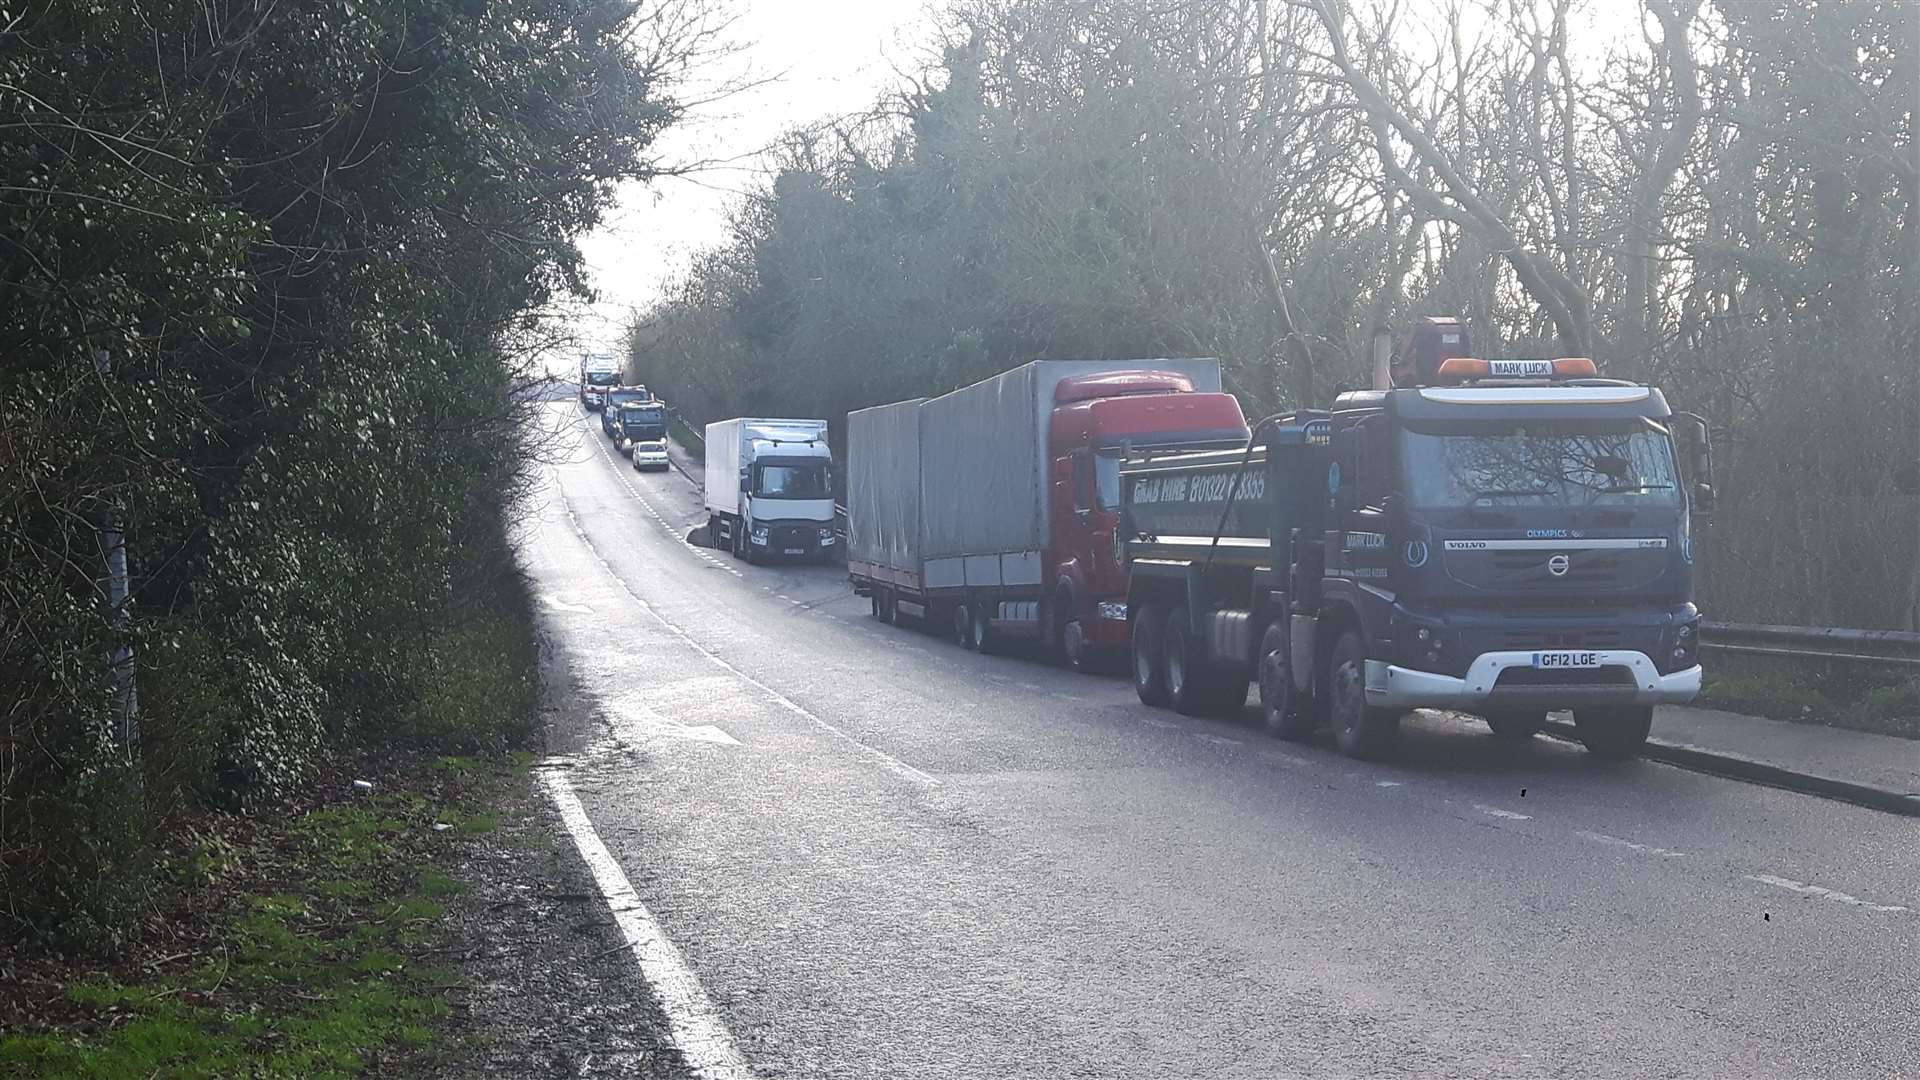 Lorries over 5 tons risk a clamp if they stay in this layby longer than 45 minutes